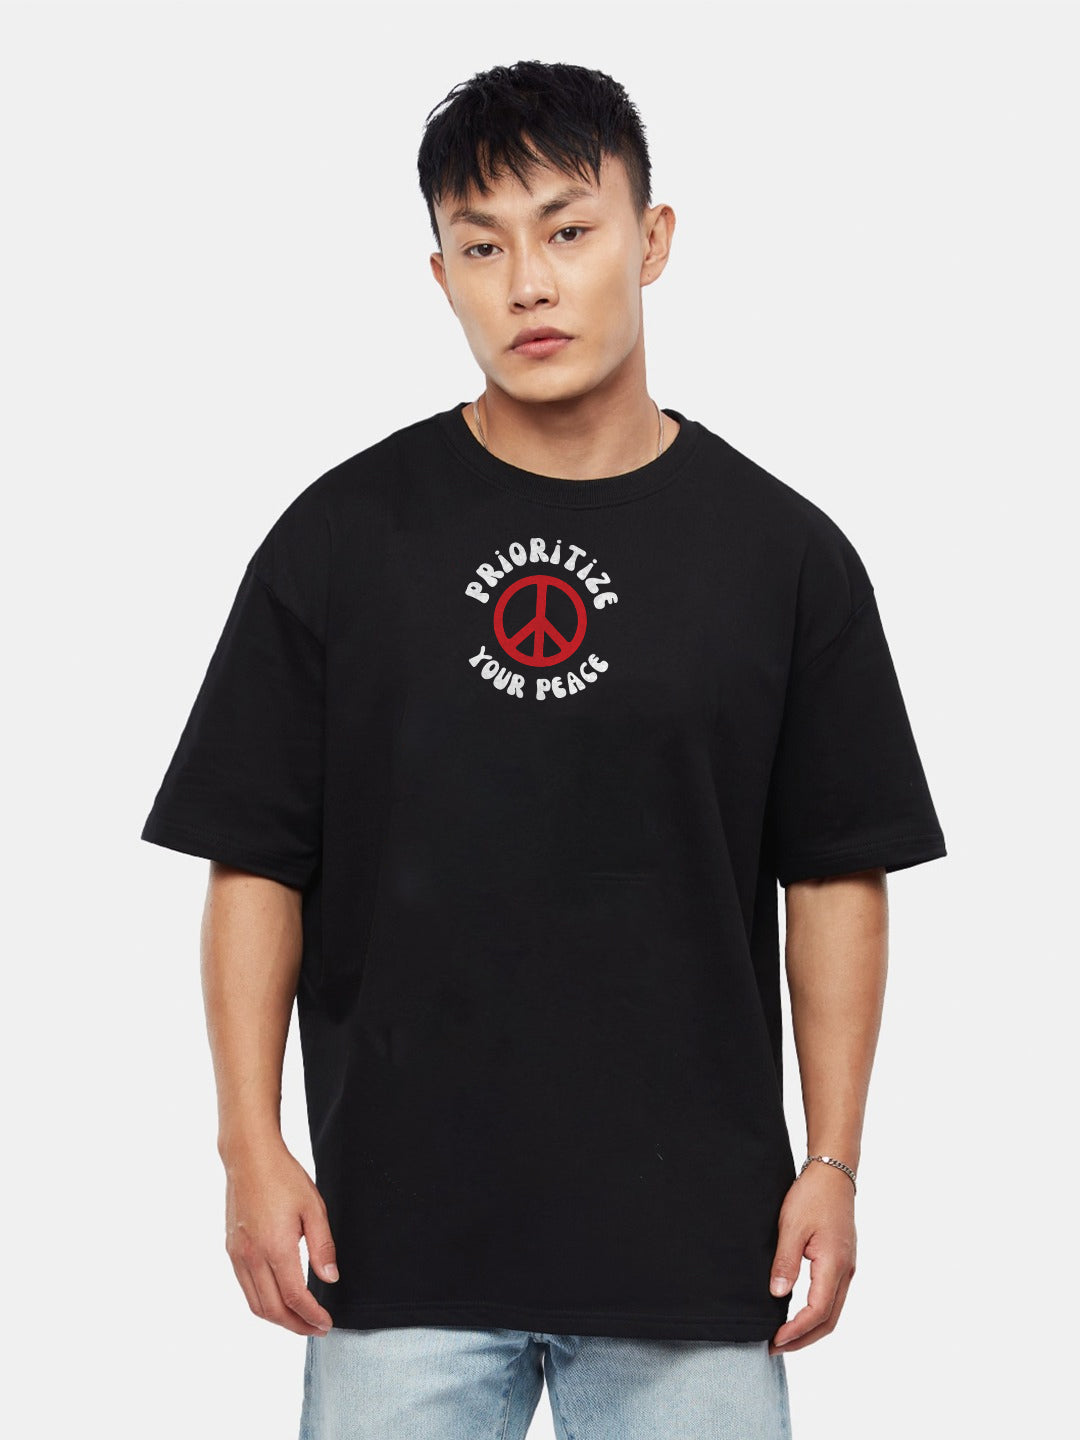 Prioritize Your Peace Oversized T-Shirt